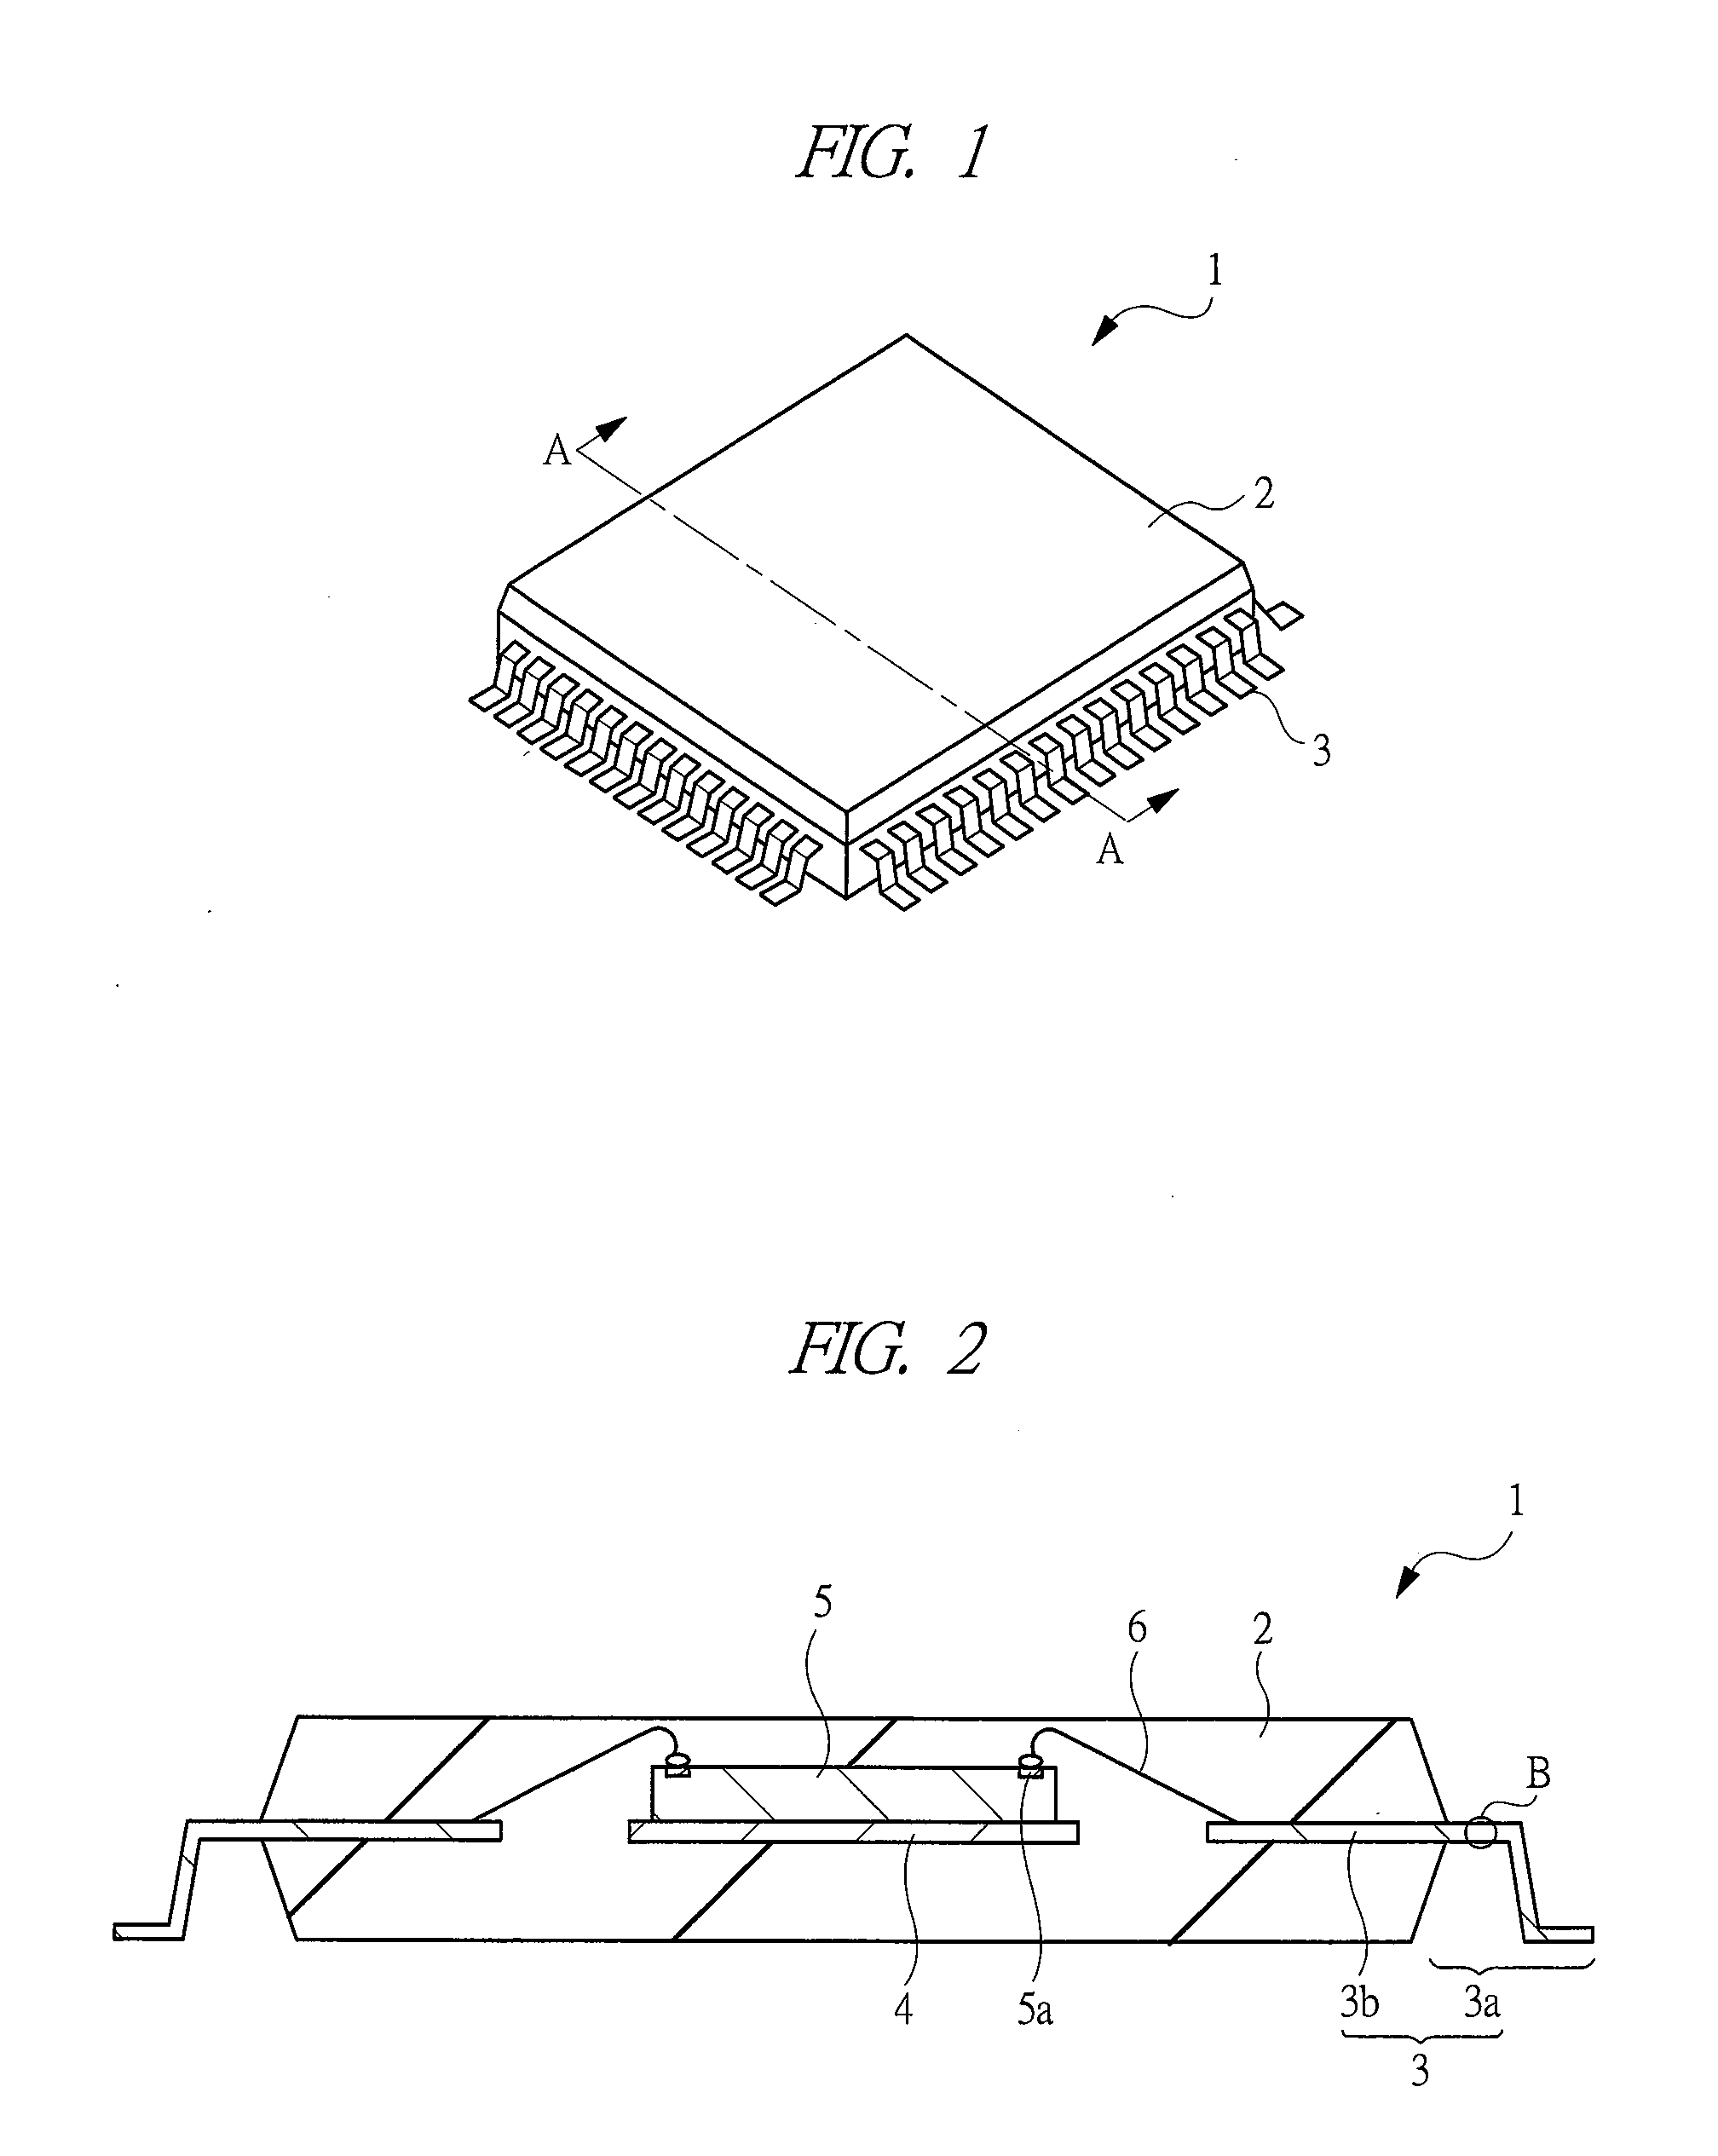 Semiconductor device and its fabrication process